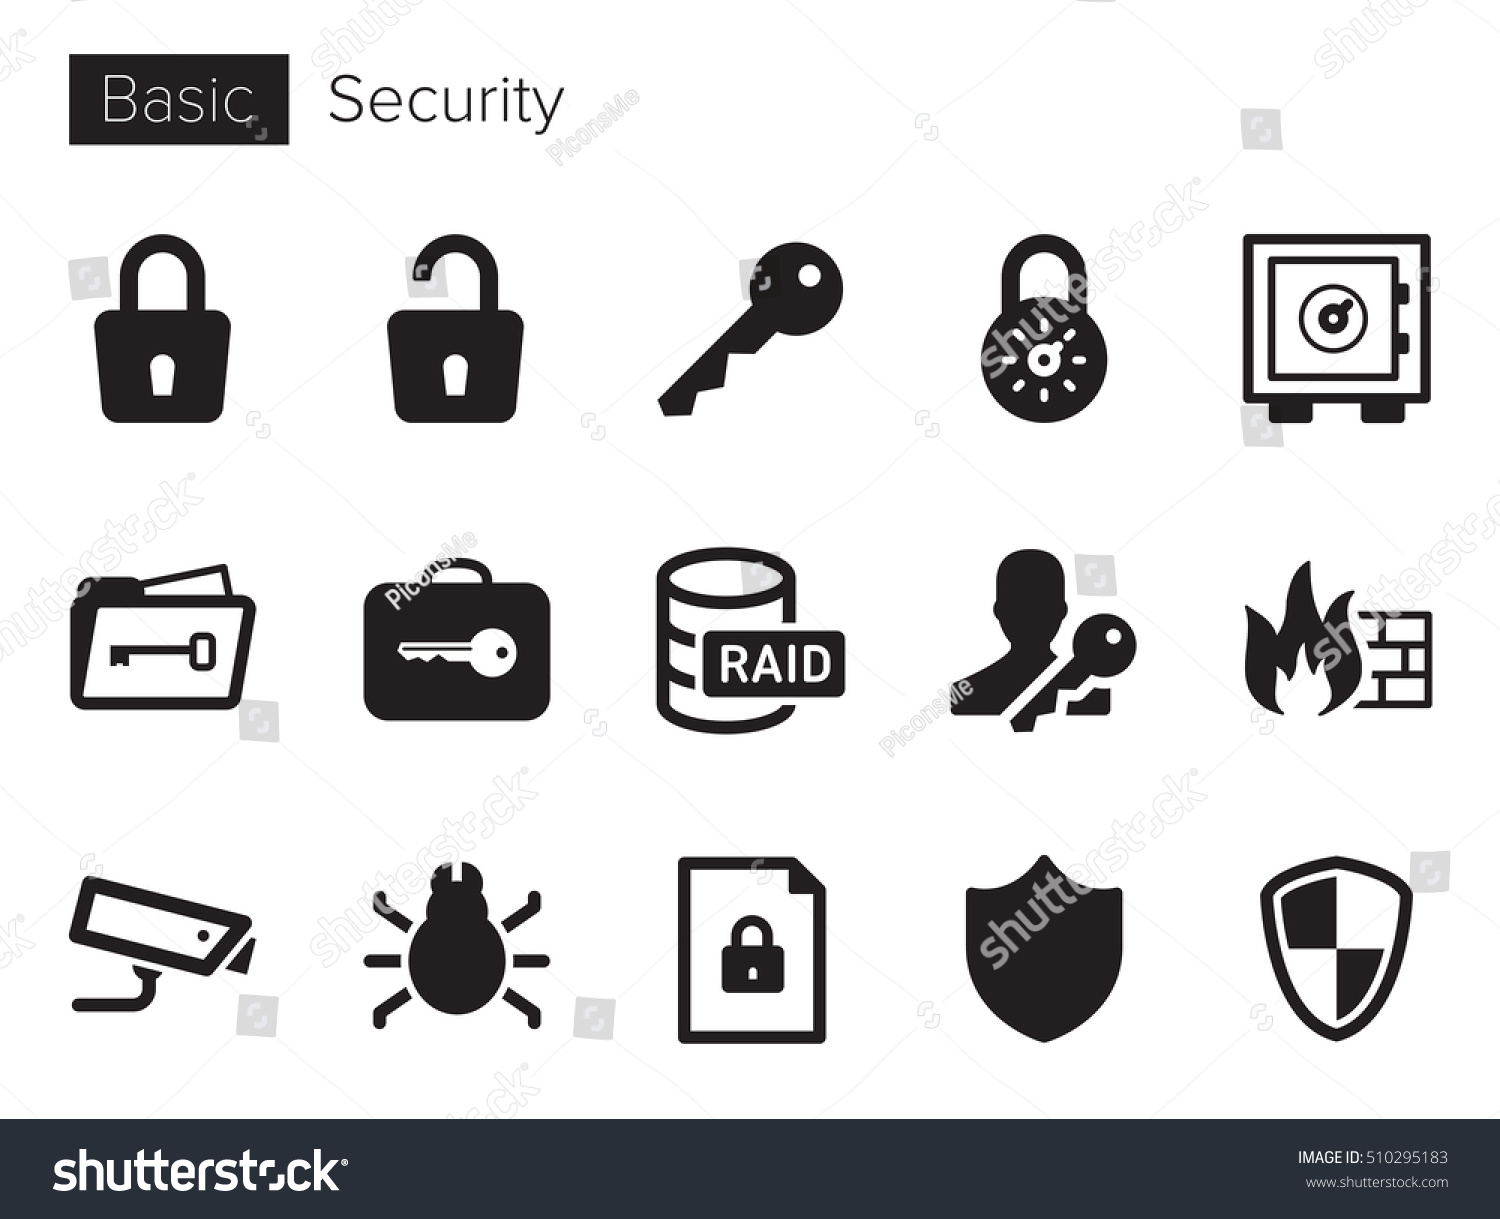 Security Vector Icons Set Stock Vector Royalty Free 510295183